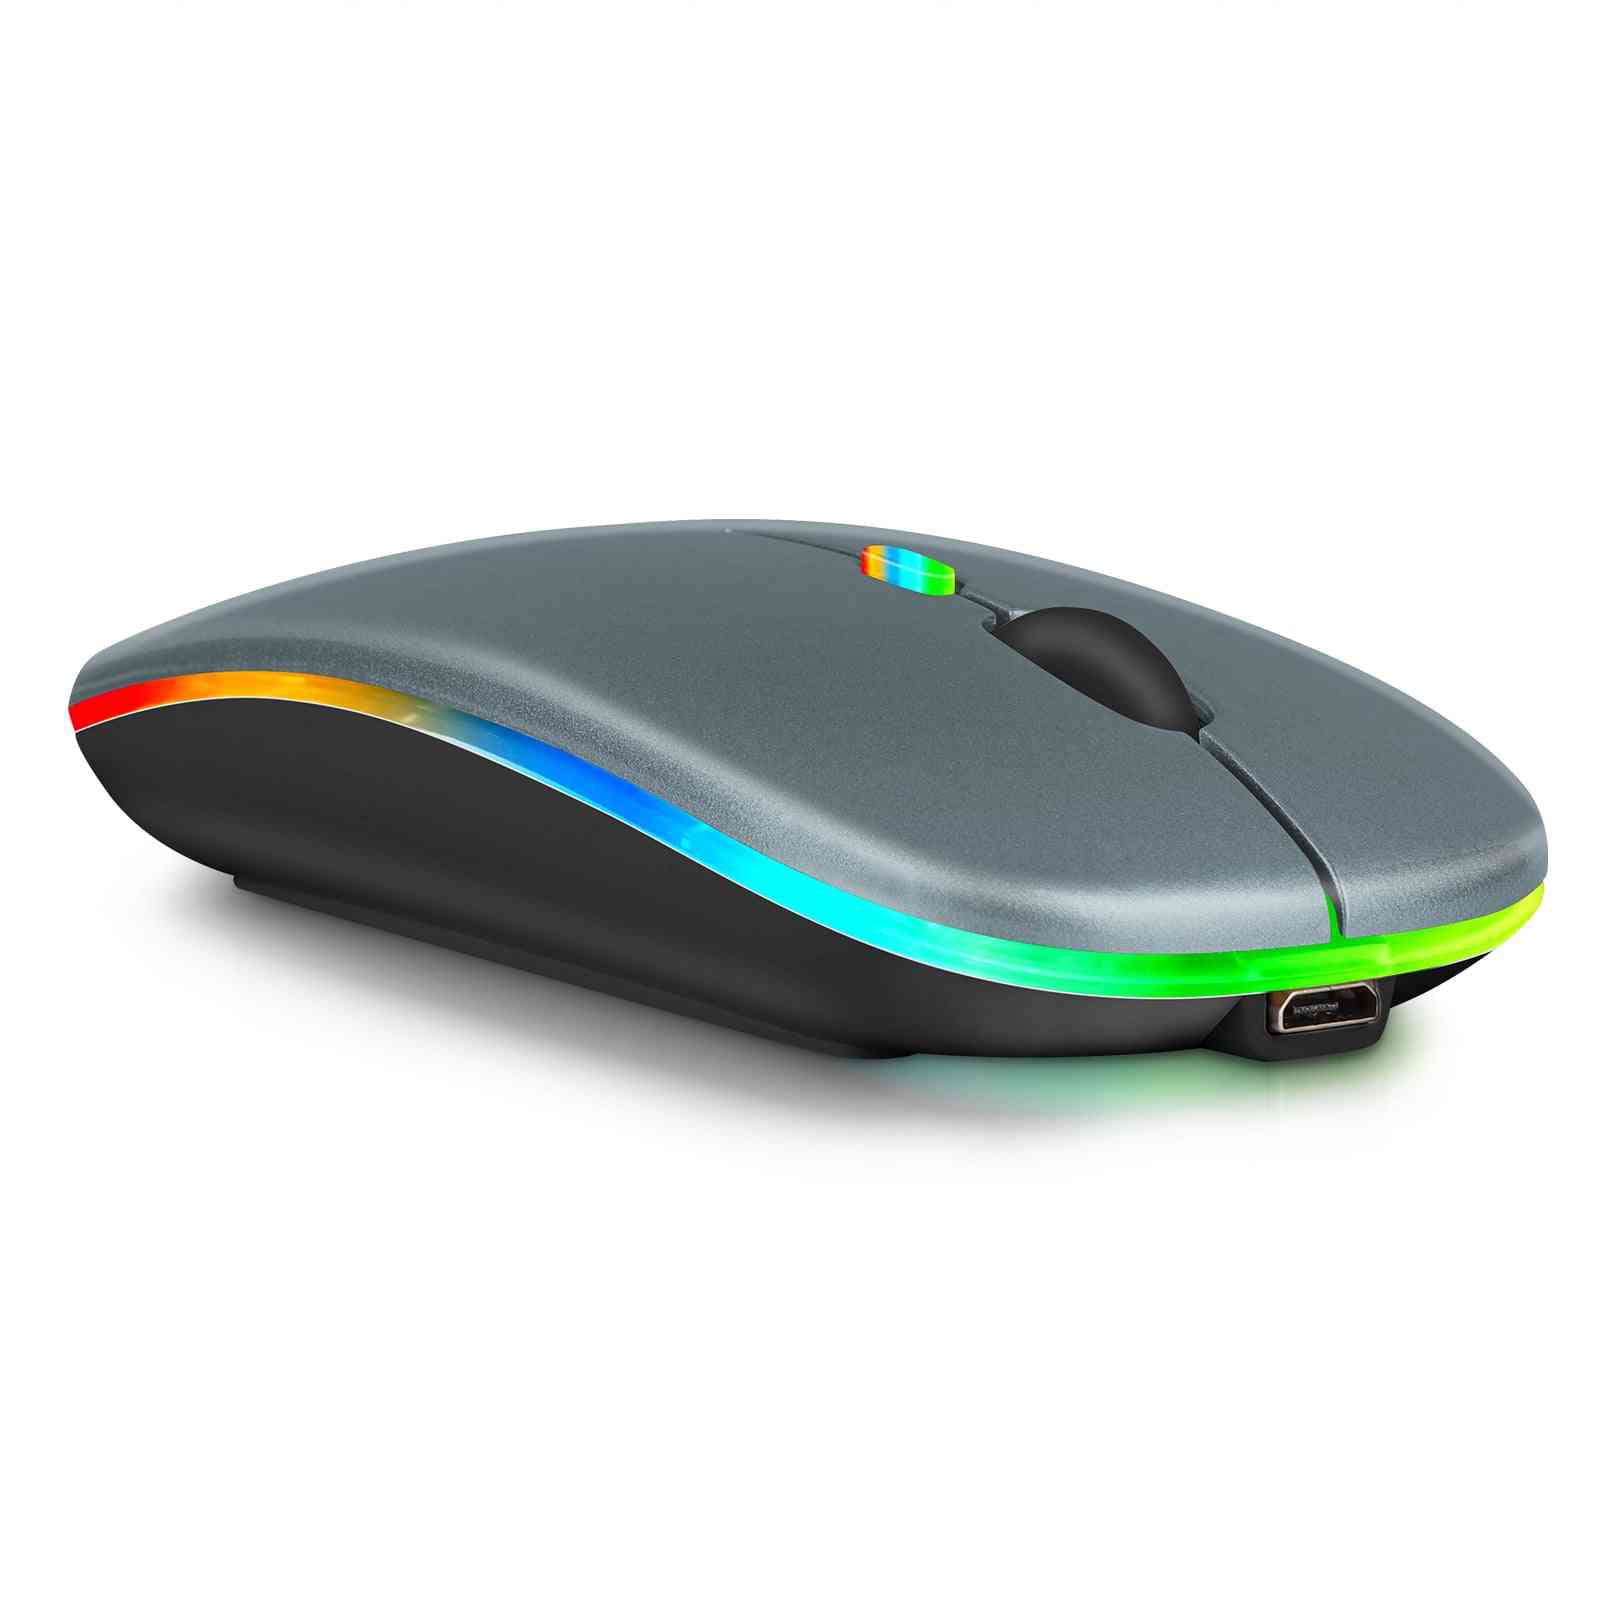 Instrument God landbouw 2.4GHz & Bluetooth Mouse, Rechargeable Wireless LED Mouse for Huawei nova  10z ALso Compatible with TV / Laptop / PC / Mac / iPad pro / Computer /  Tablet / Android - Titanium - Walmart.com